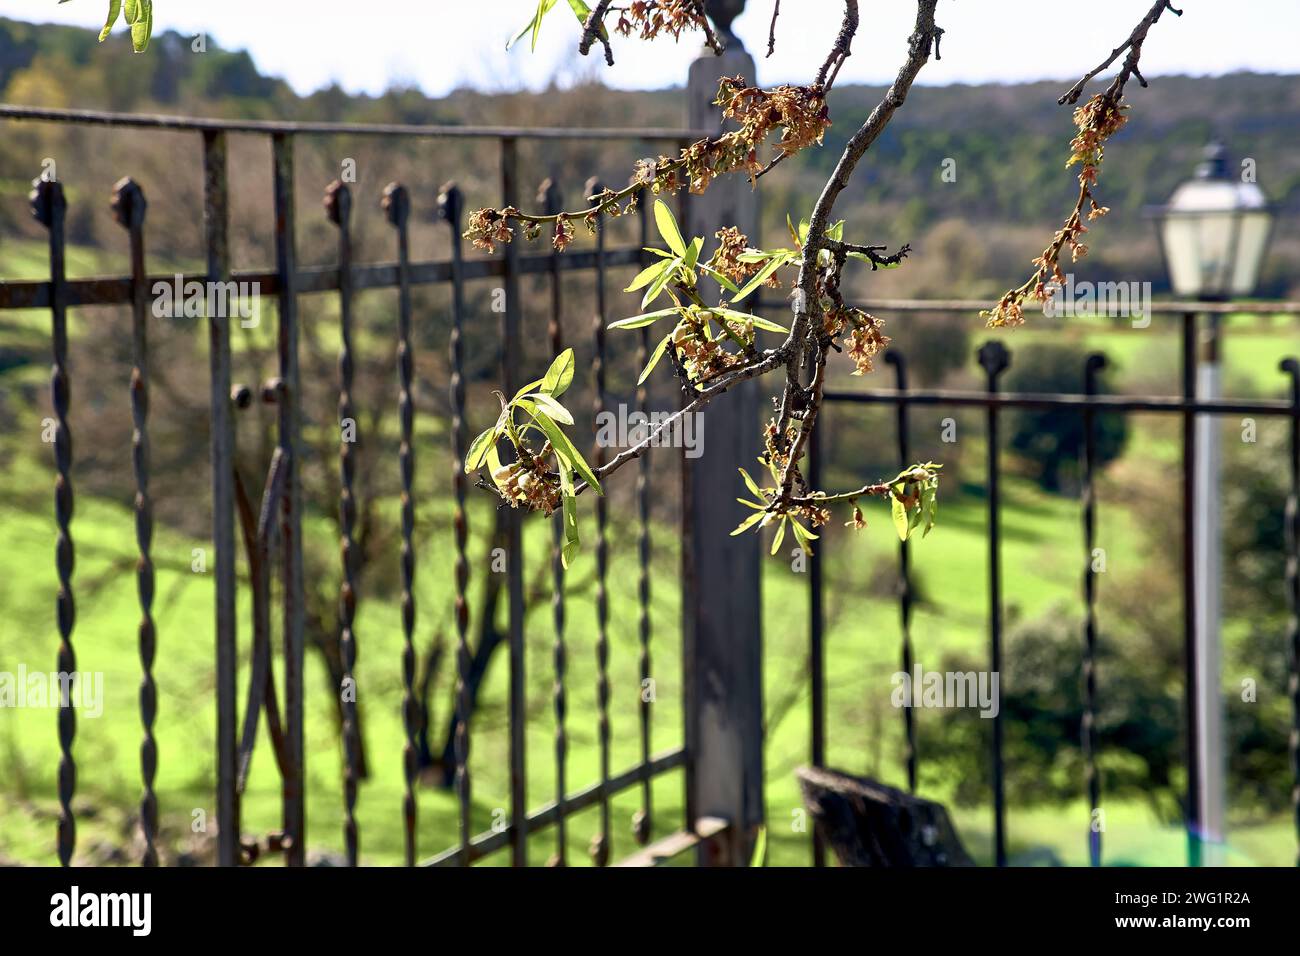 Patio of town house with views of the mount. Fence & Almond blossoms detail plan. Stock Photo